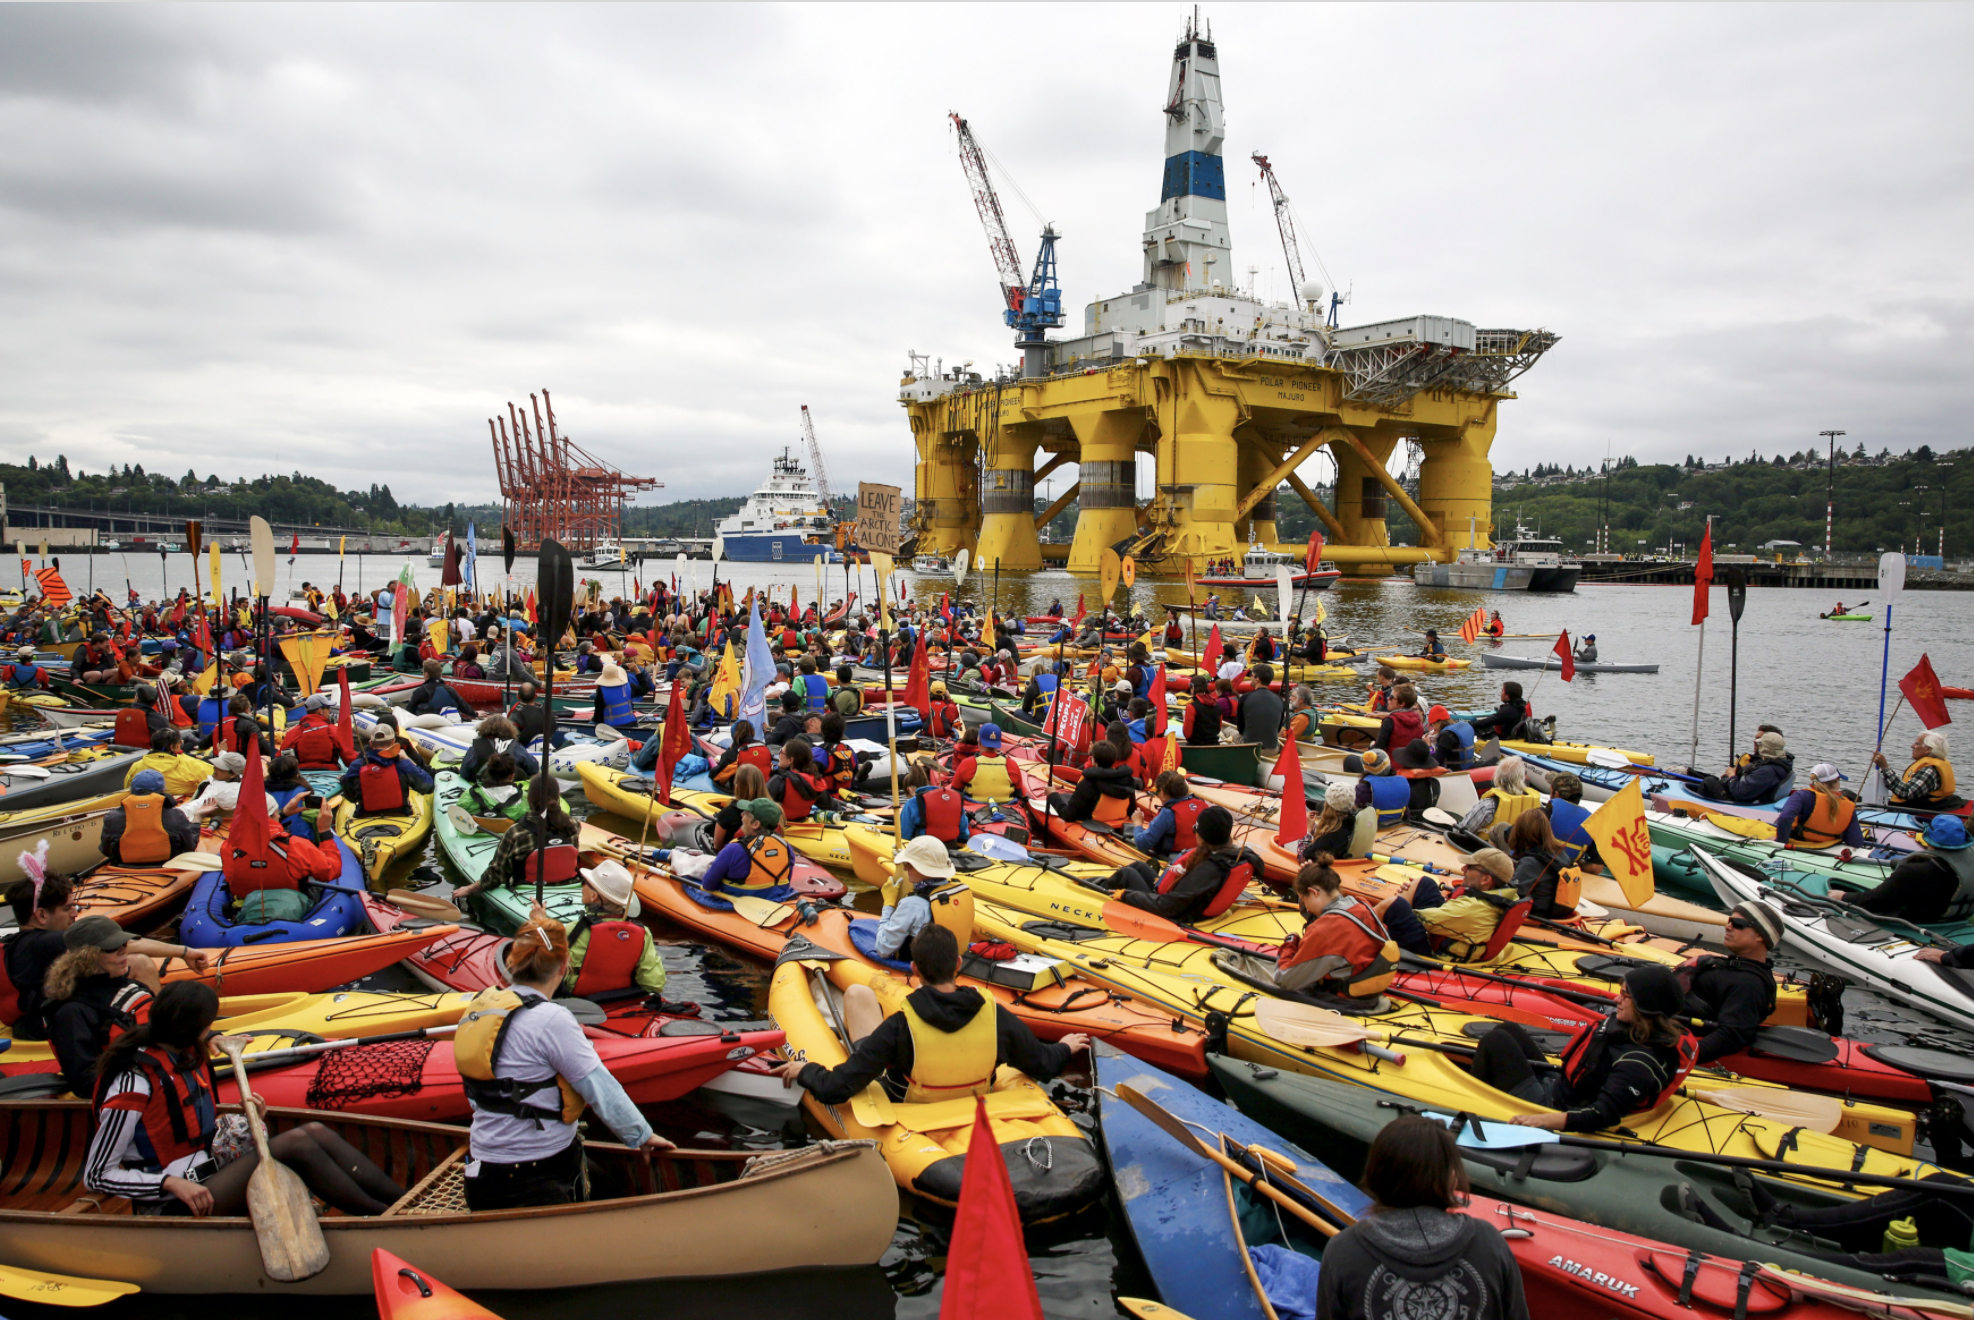 Photograph of S(h)ell no! Seattle Protest over Arctic Drilling, May 2015.